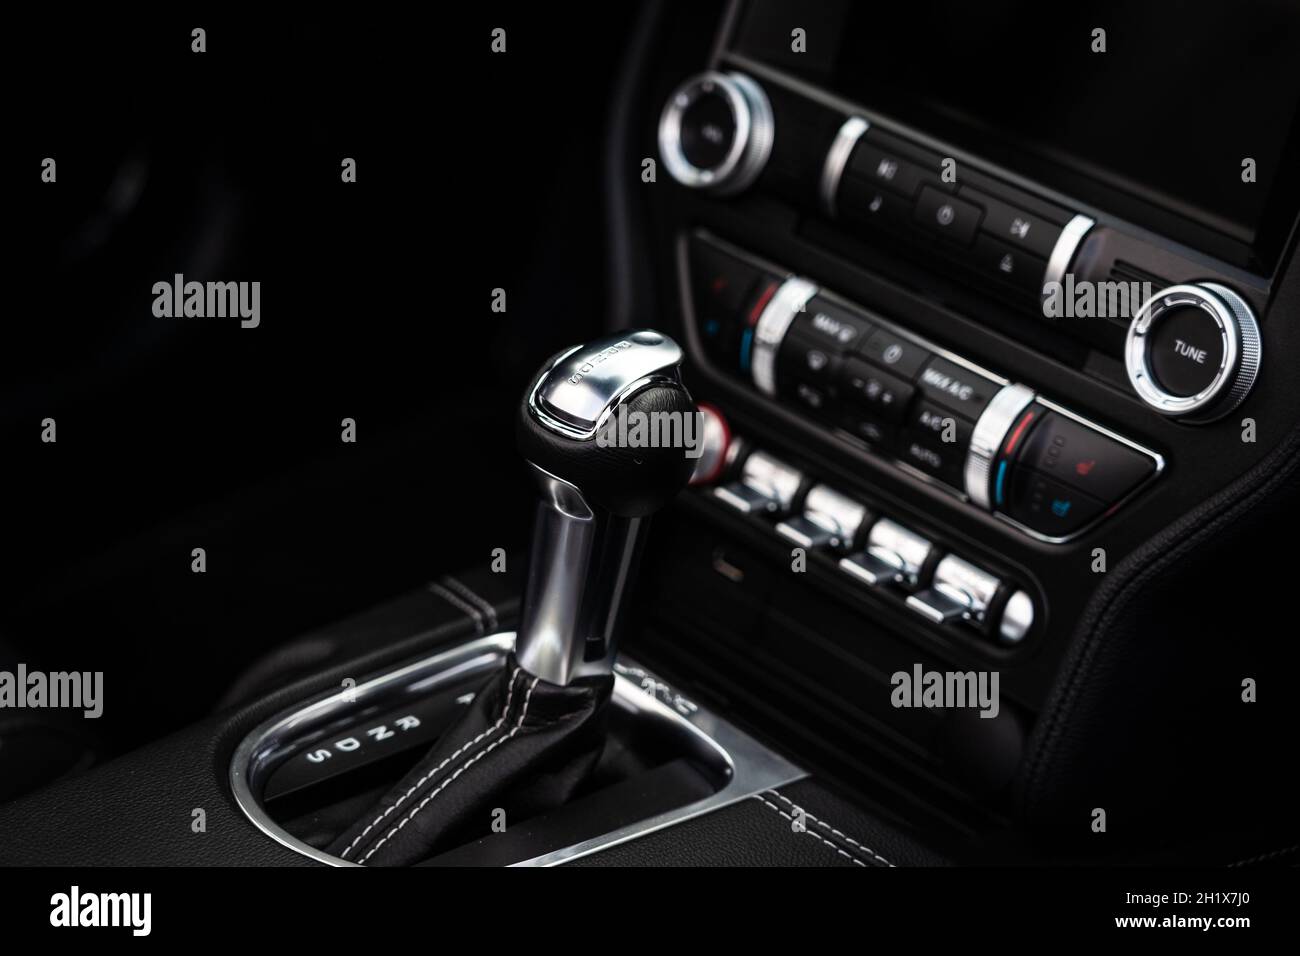 DIEDERSDORF, GERMANY - AUGUST 21, 2021: The details of interior of sports car Ford Mustang (sixth generation), close-up. Focus on the foreground. The Stock Photo